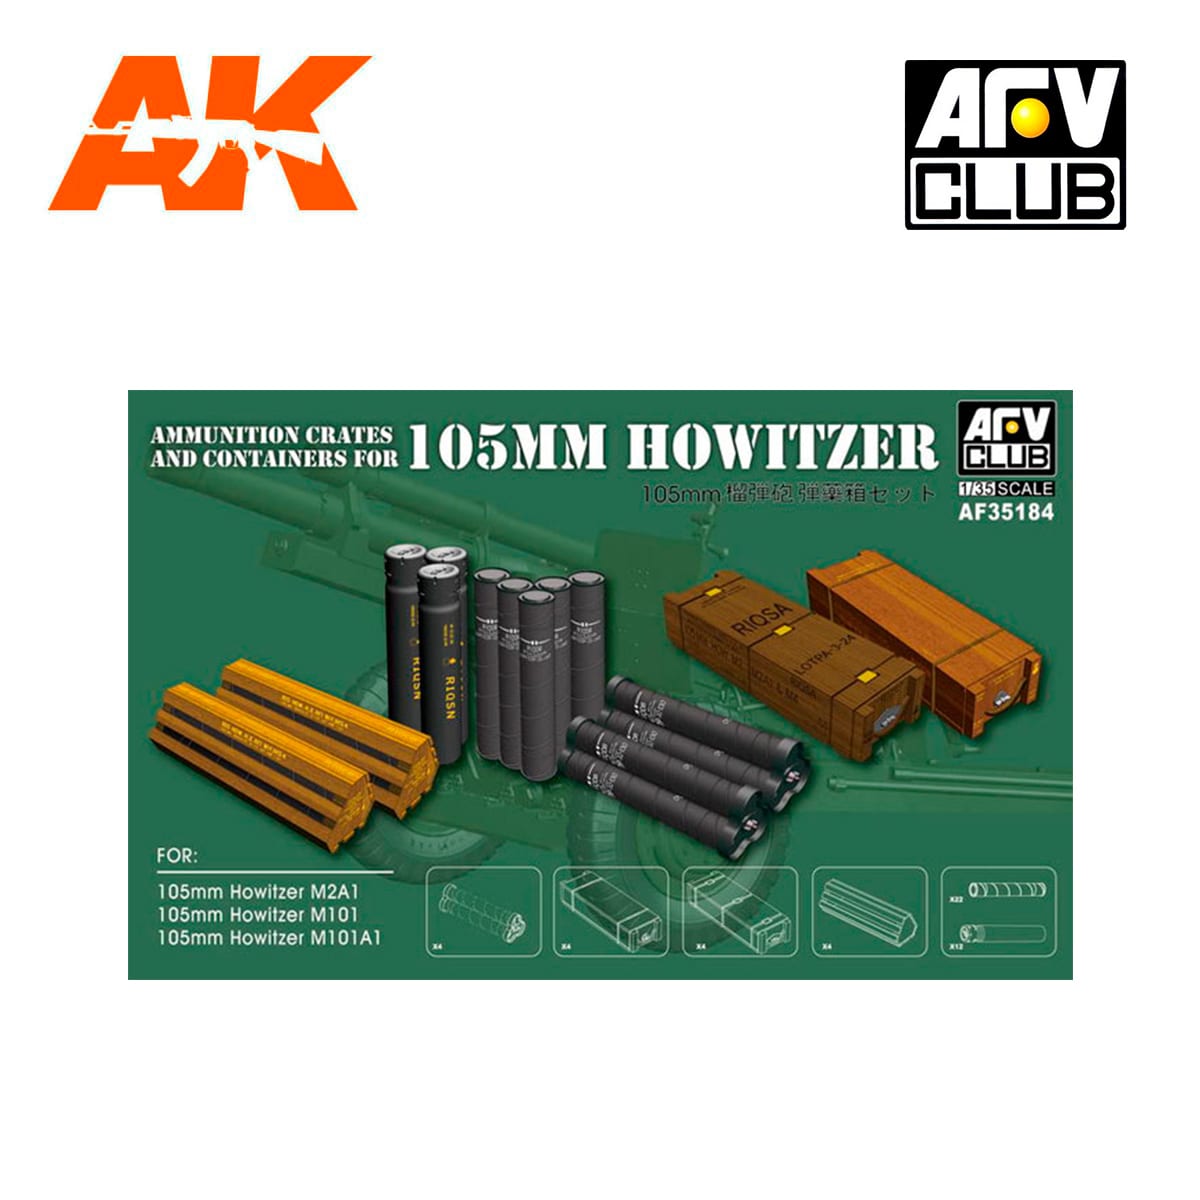 AMMUNITION CRATES AND CONTAINERS FOR 105mm HOWITZER(M101/M101A1/M2A1) 1/35